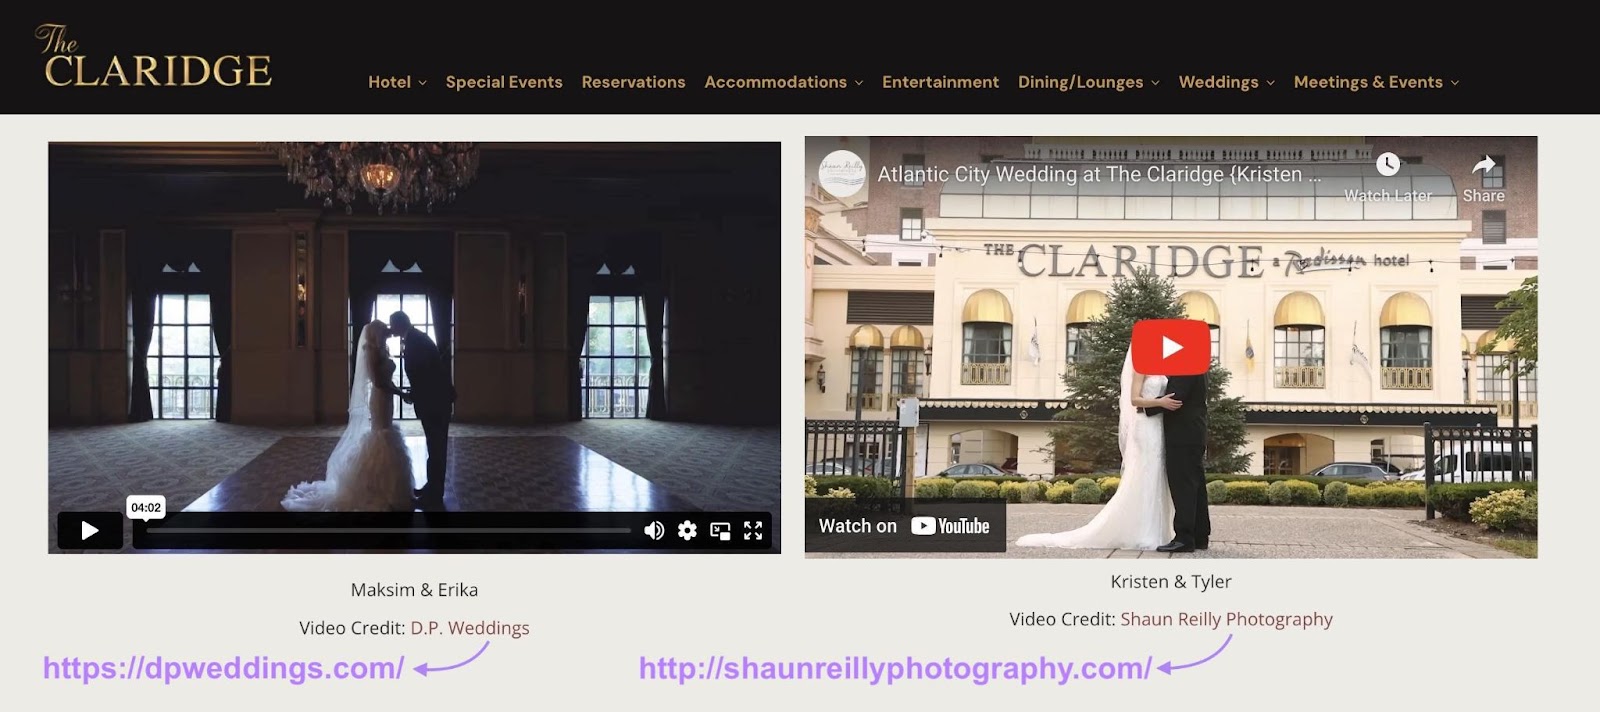 video credits shown on The Claridge Hotel page